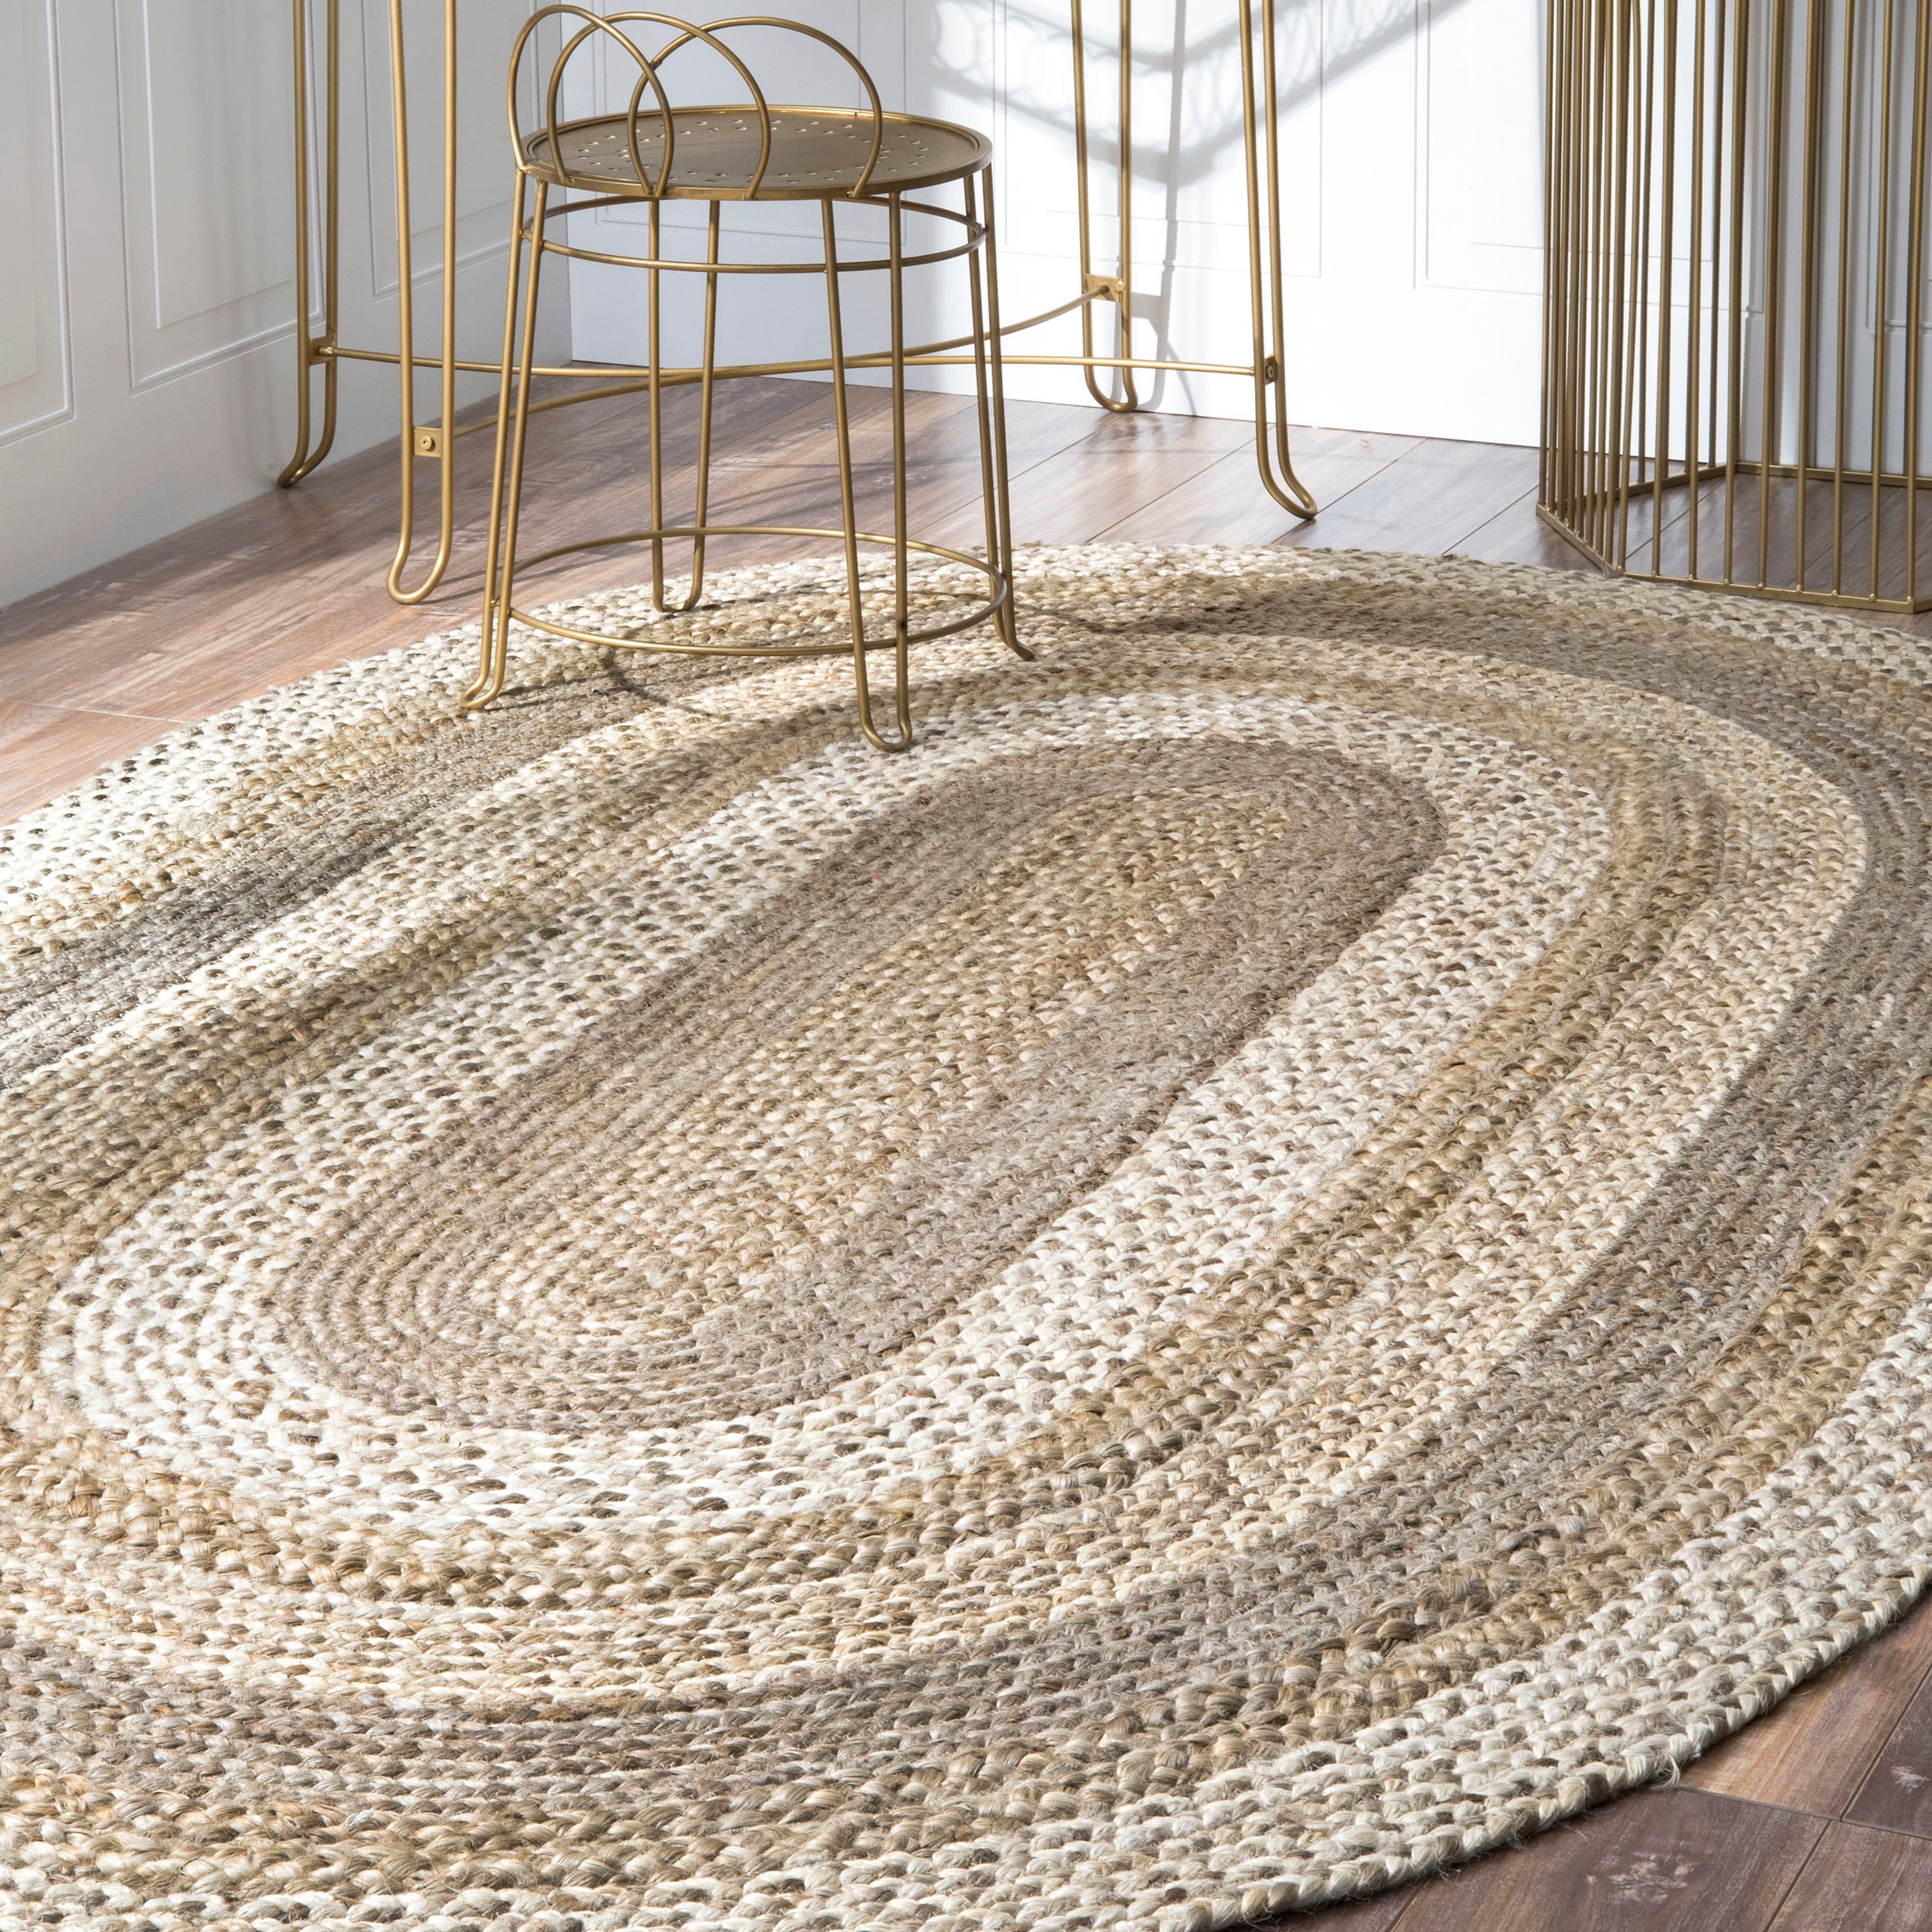 Katherine Multi Oval Indoor/Outdoor Oval Braided Rug, 2 by 3-Feet, Camel